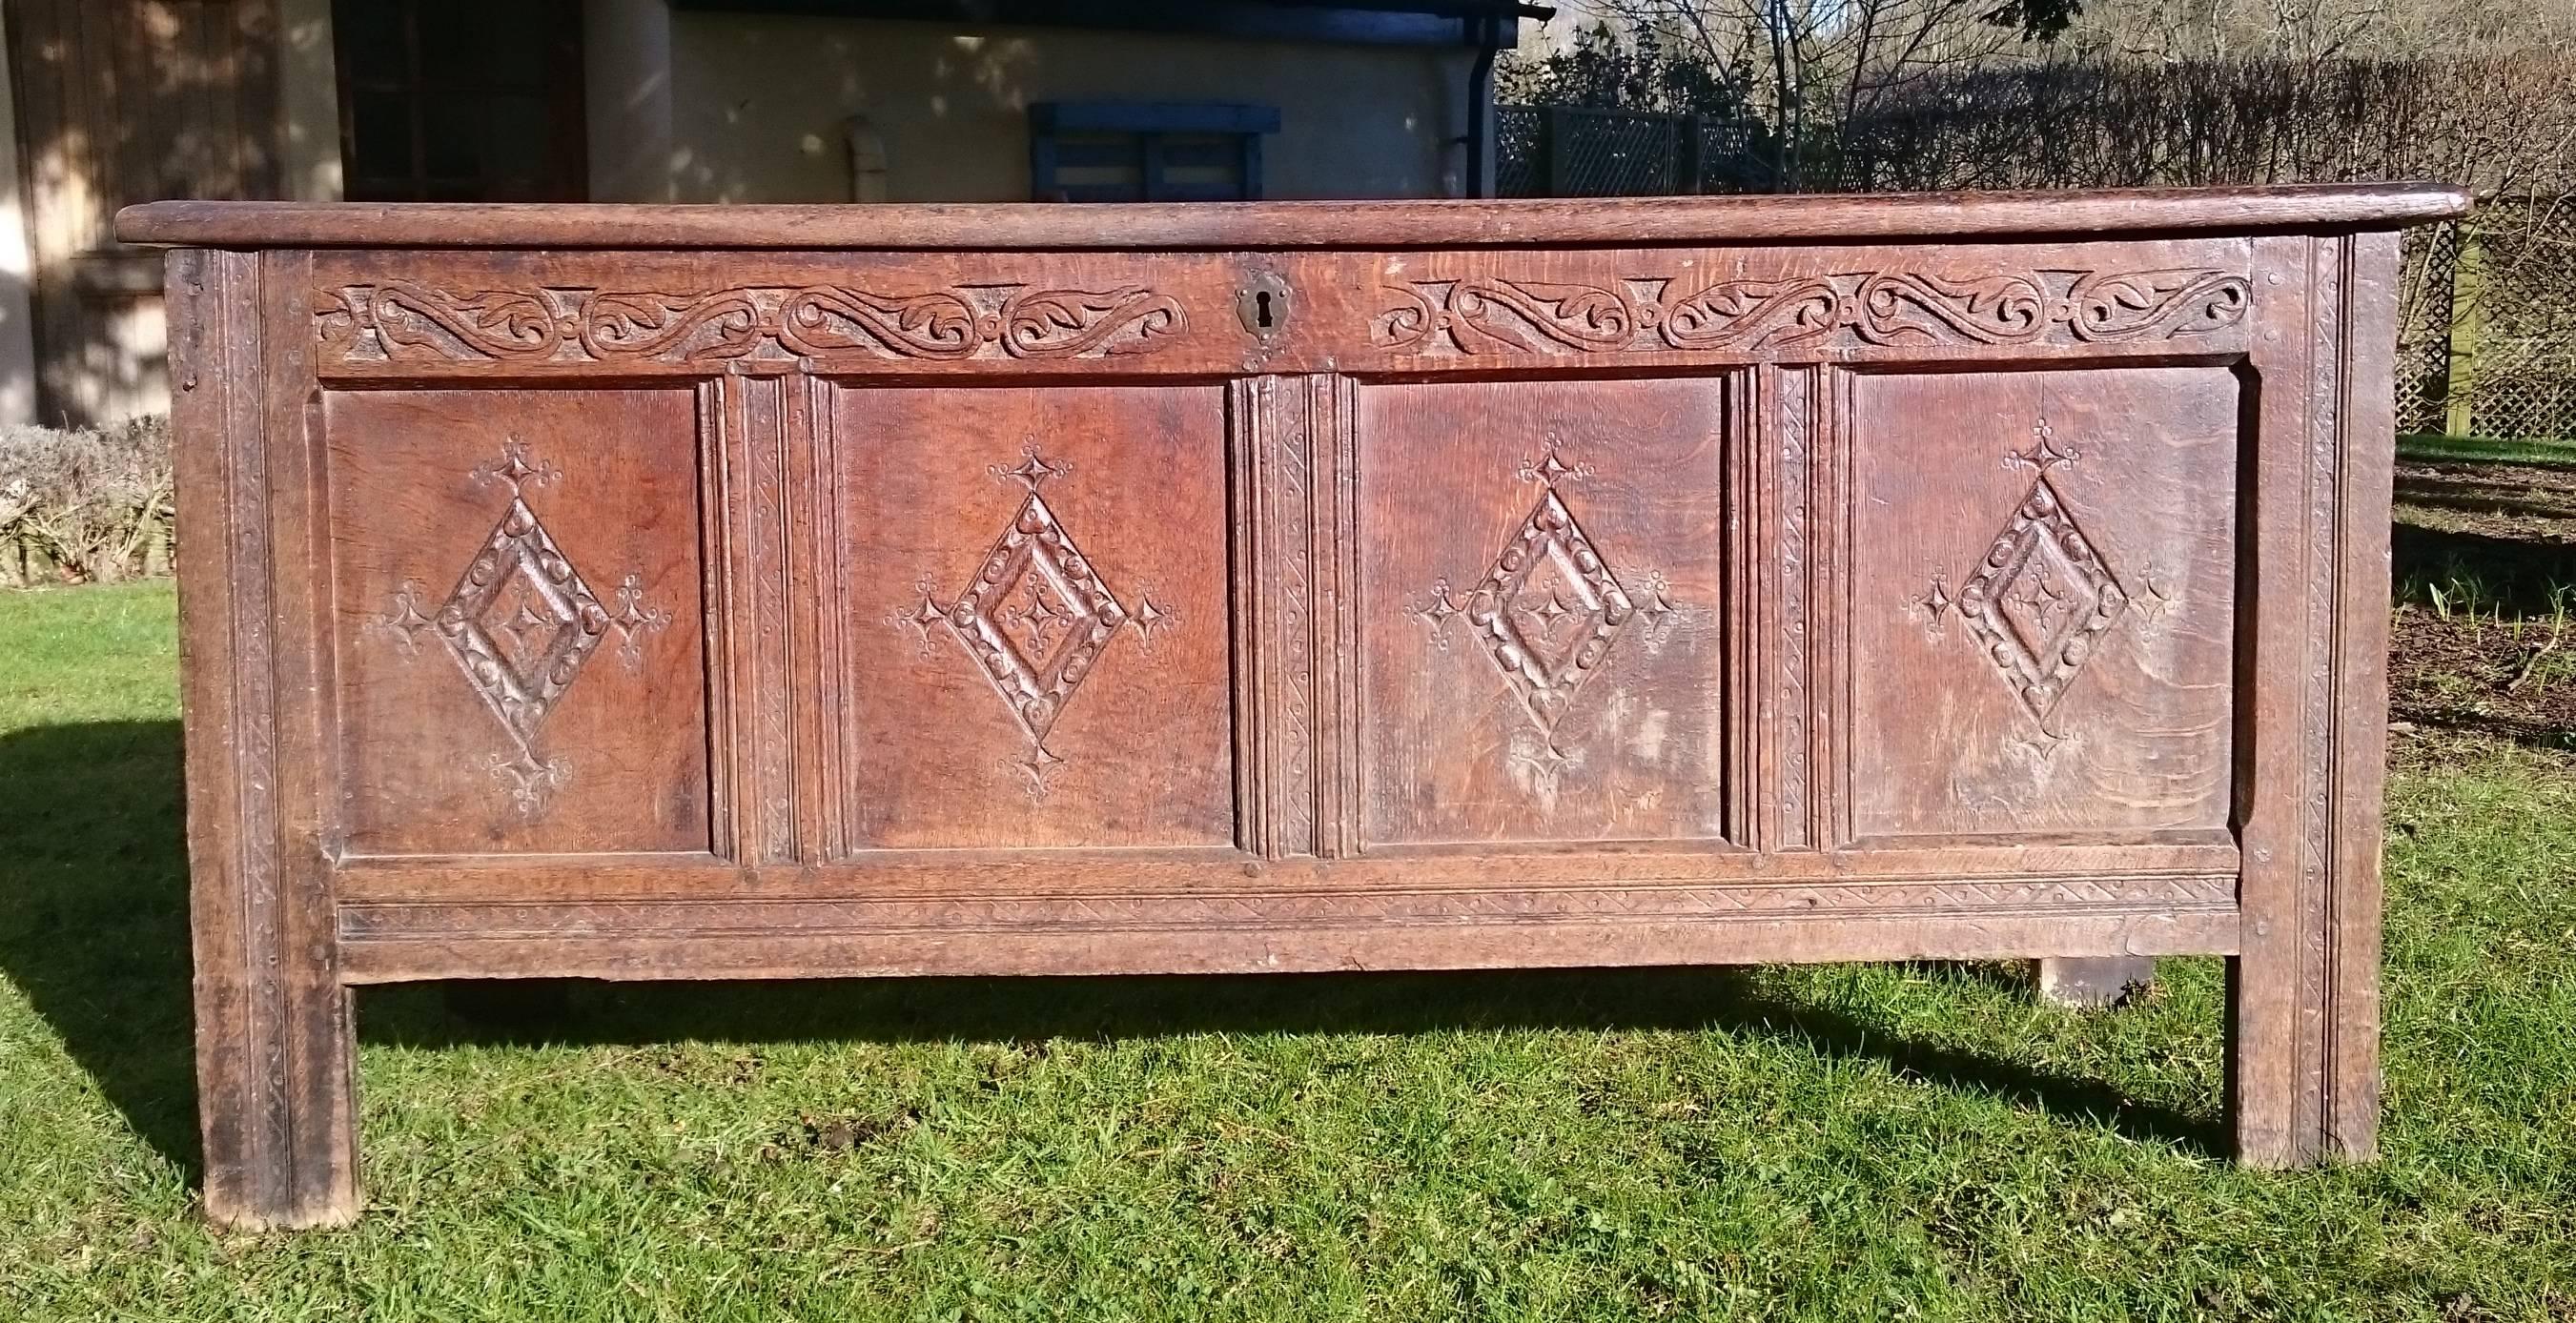 17th century antique oak coffer dating from the William and Mary period. This coffer has good moulded detail on the front of the legs, the uprights and around the panels on the top. There are four panels on the front and three on the top, the front